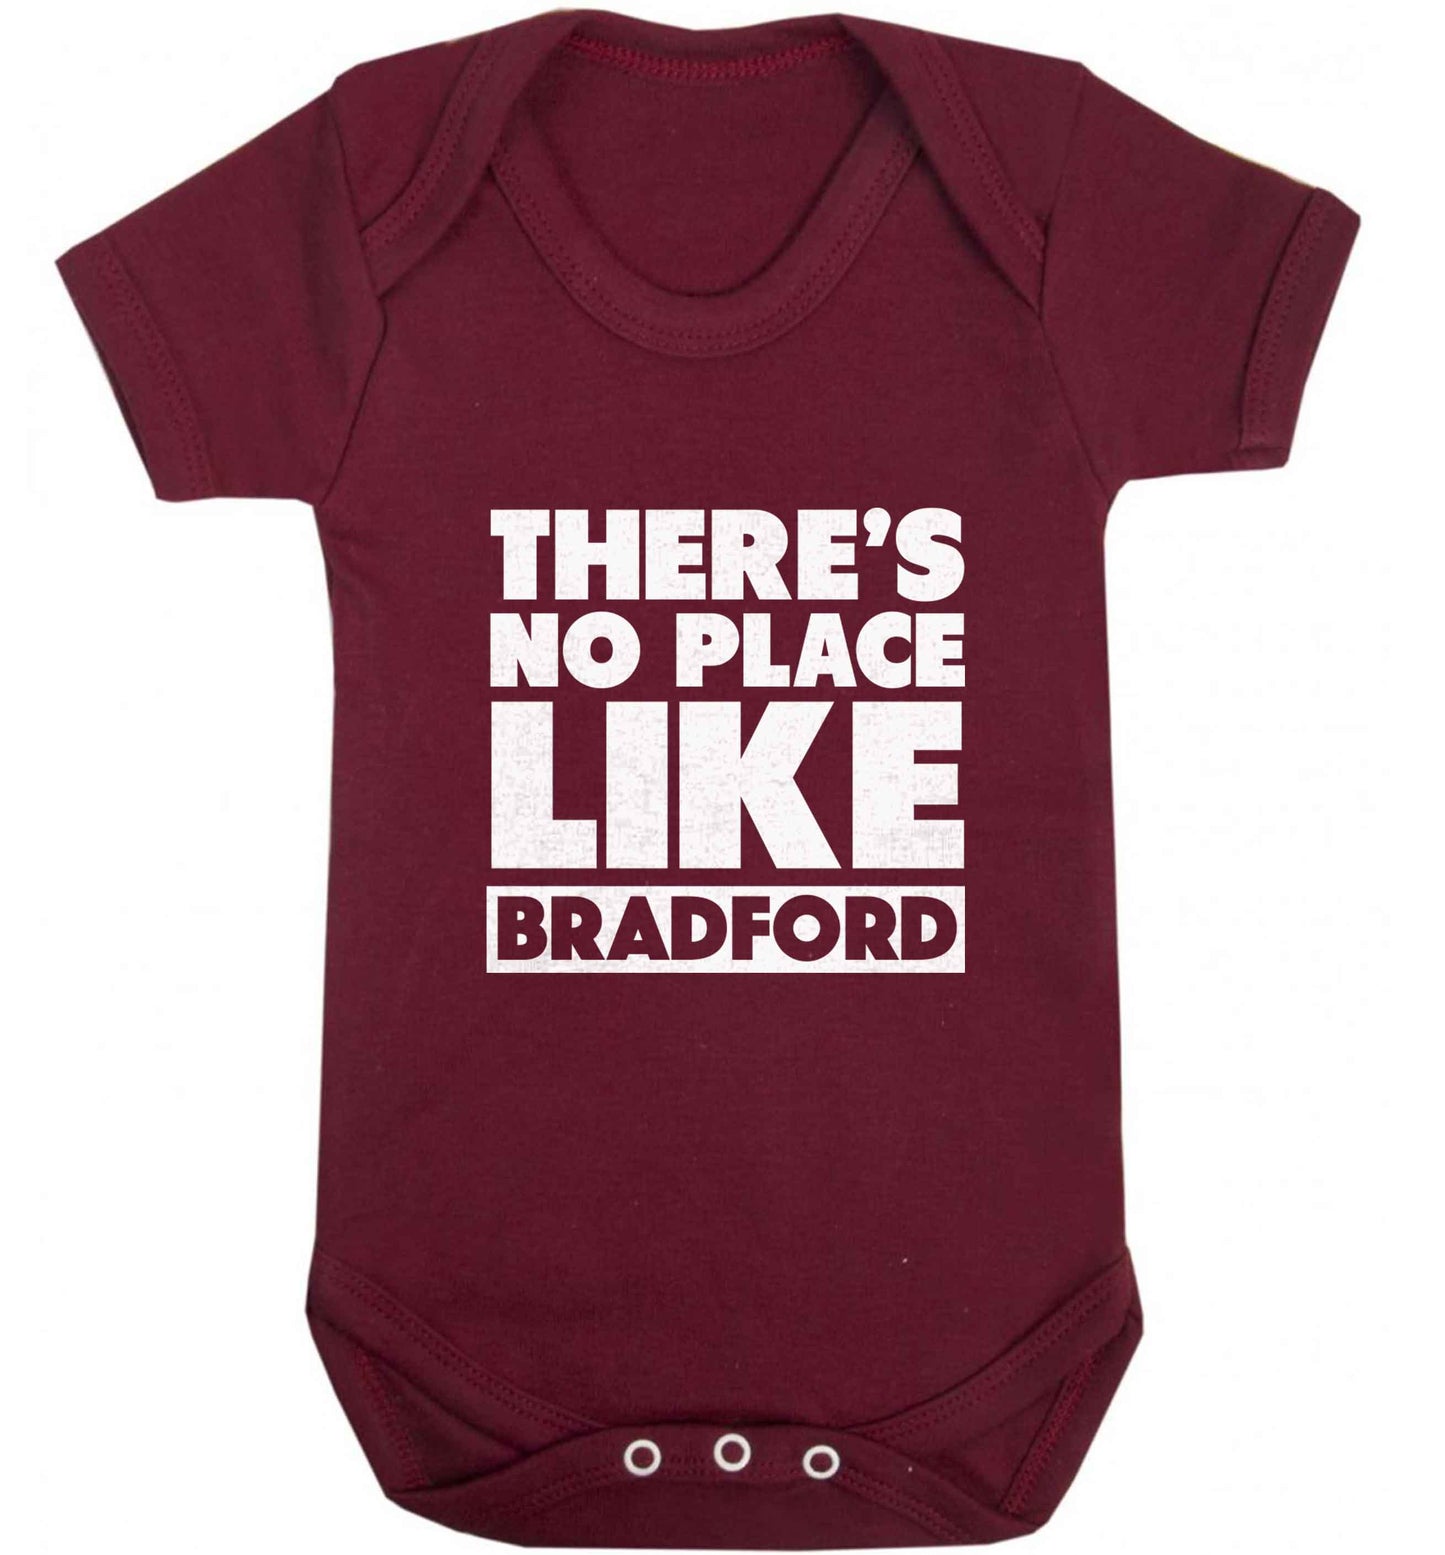 There's no place like Bradford baby vest maroon 18-24 months